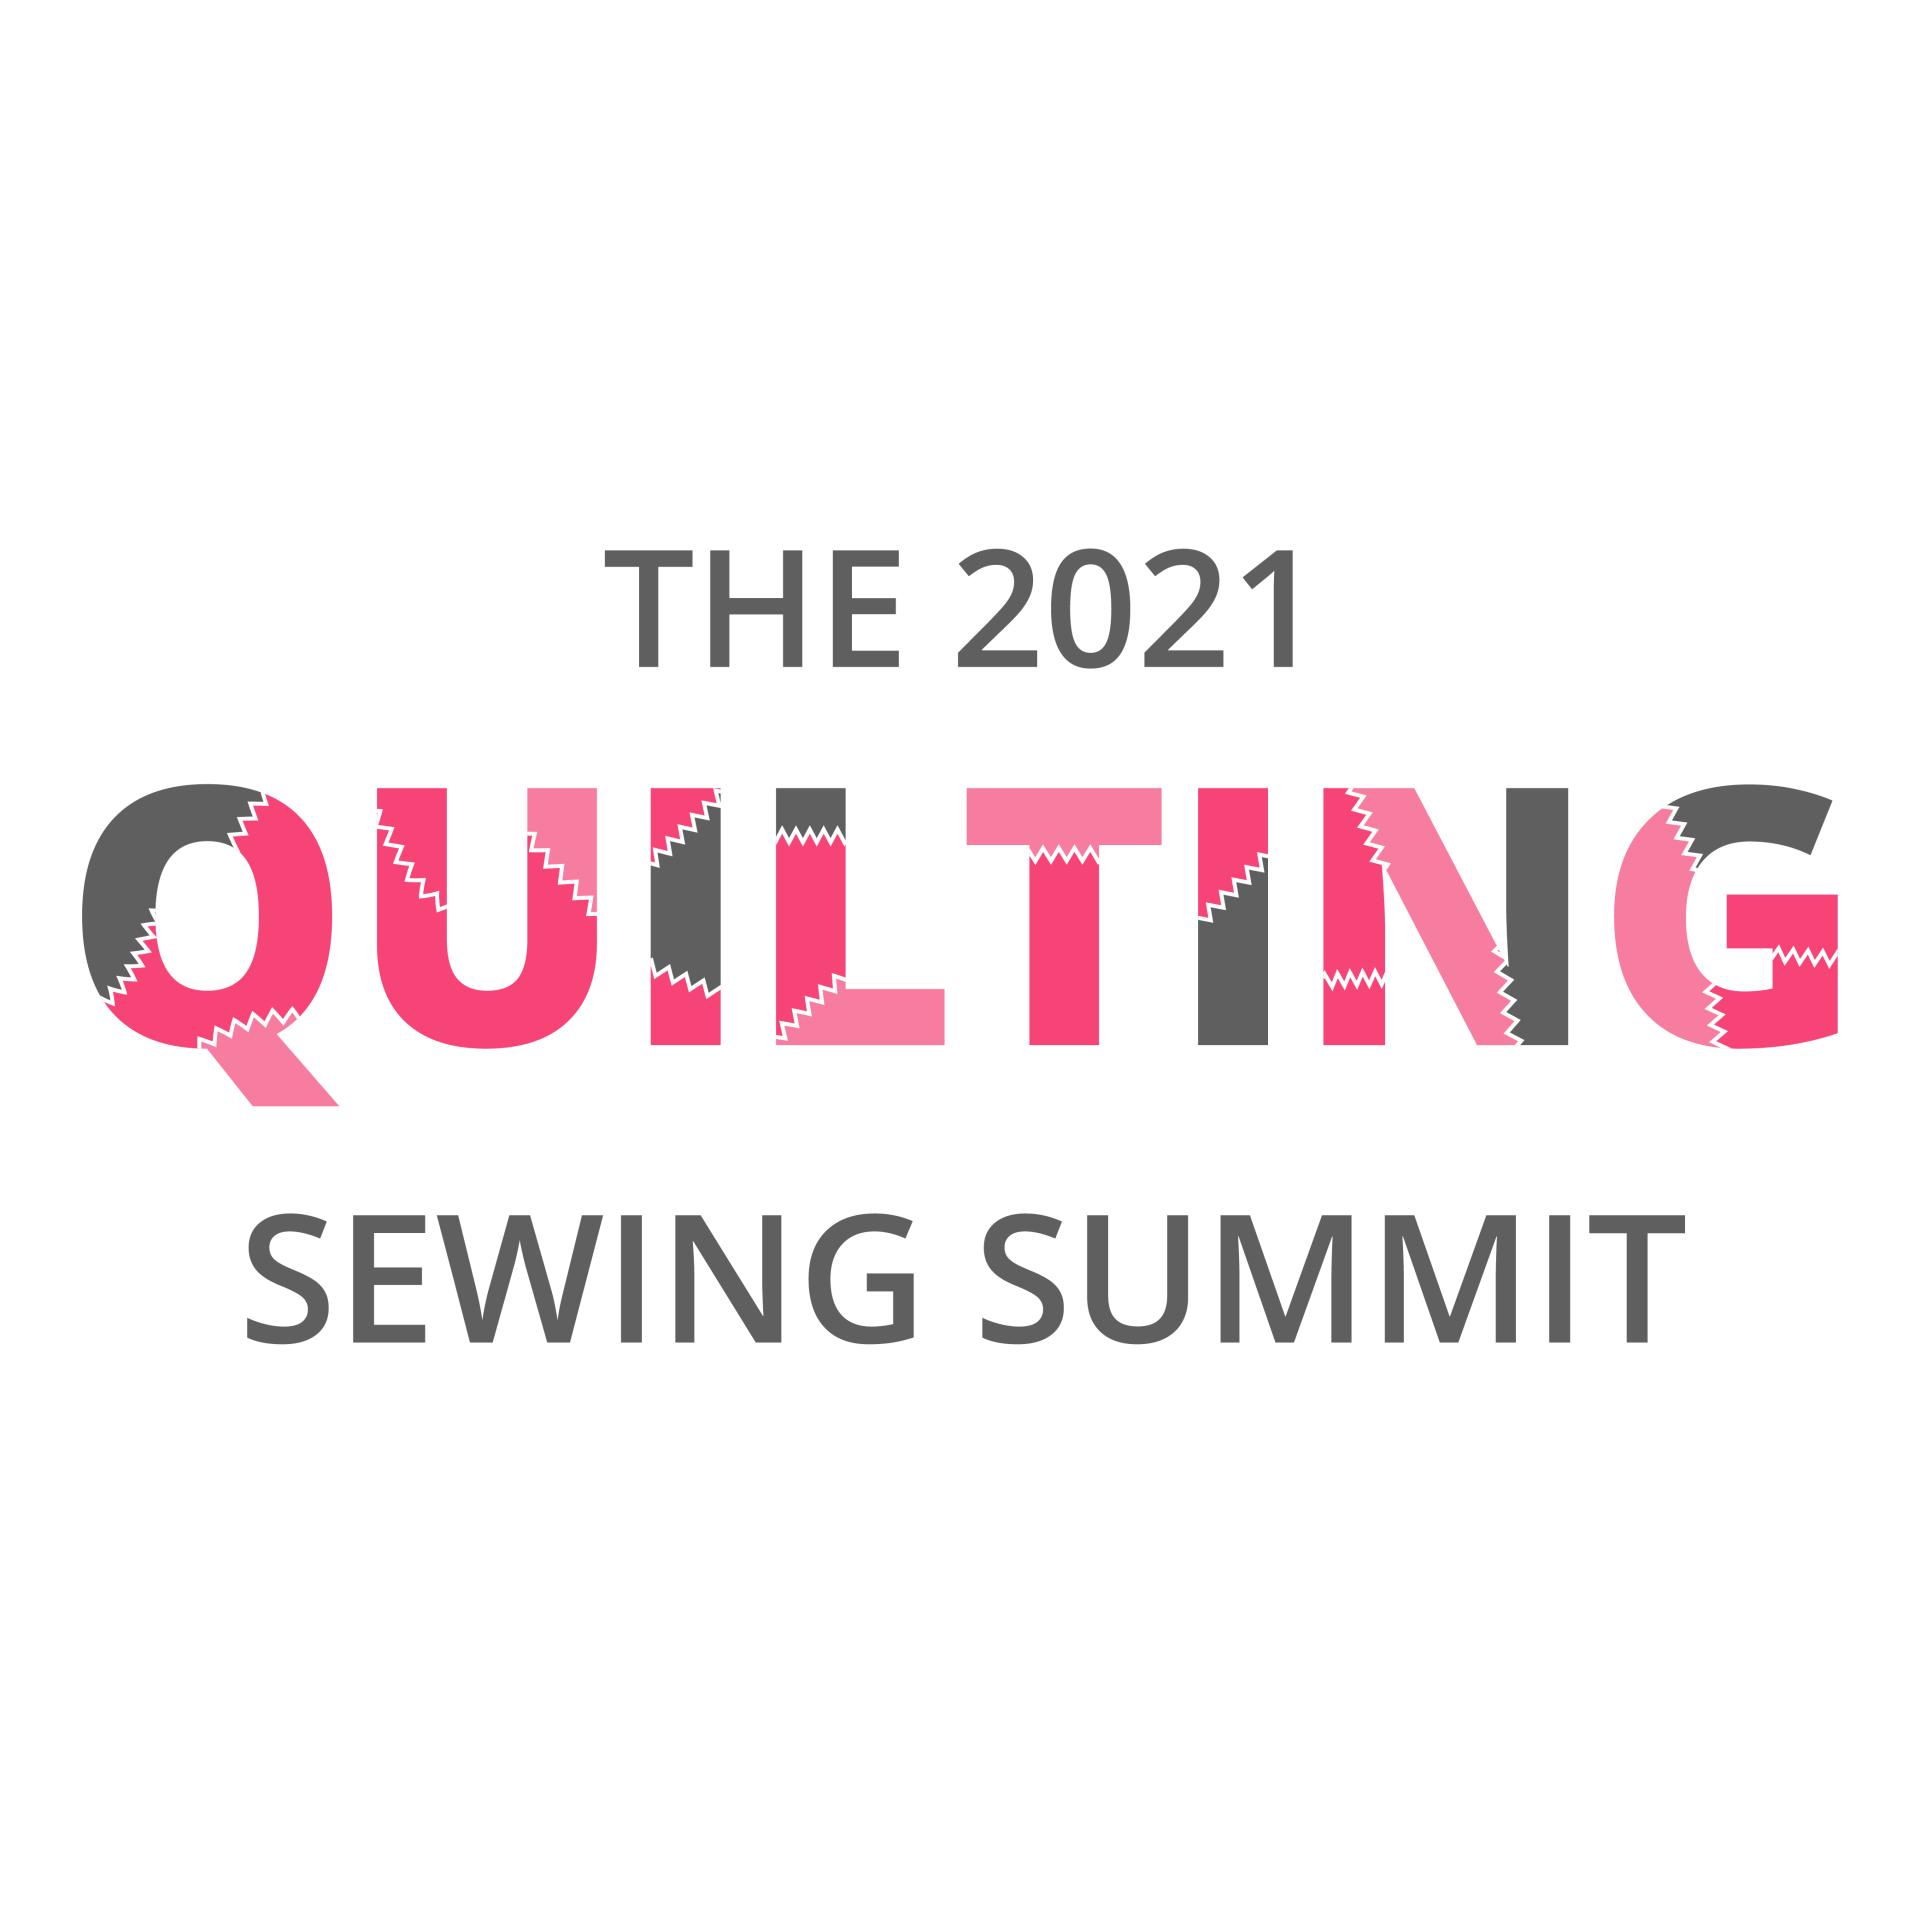 The 2021 Quilting Sewing Summit